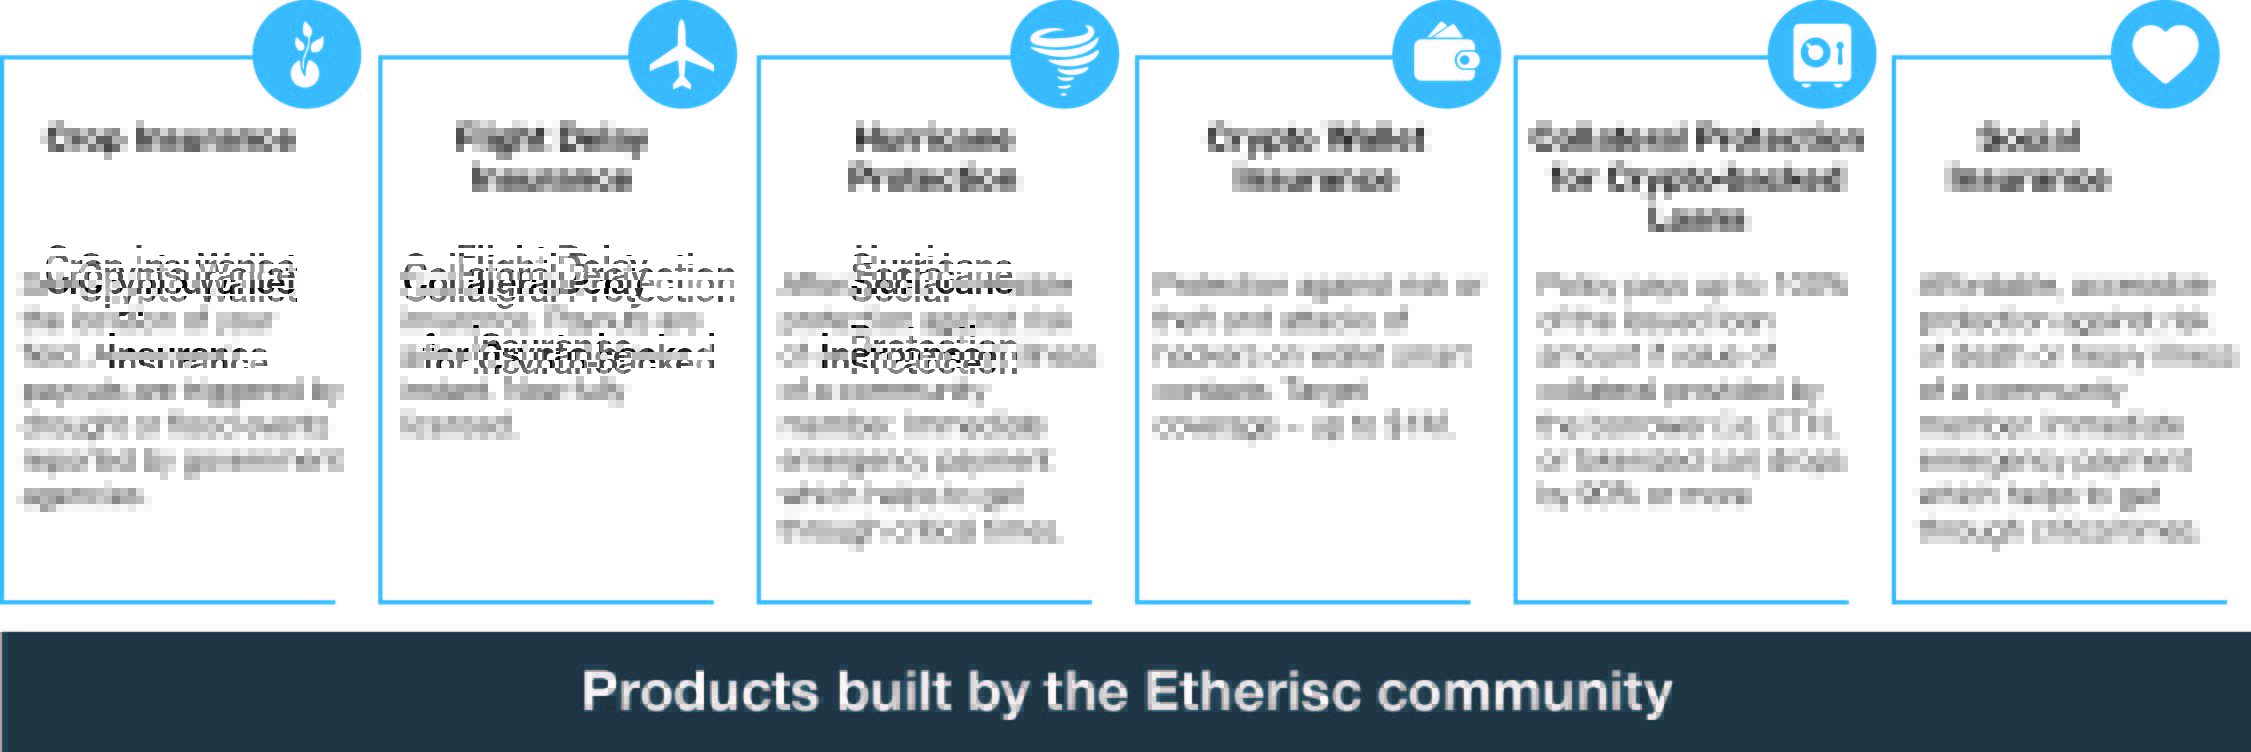 etherisc community products